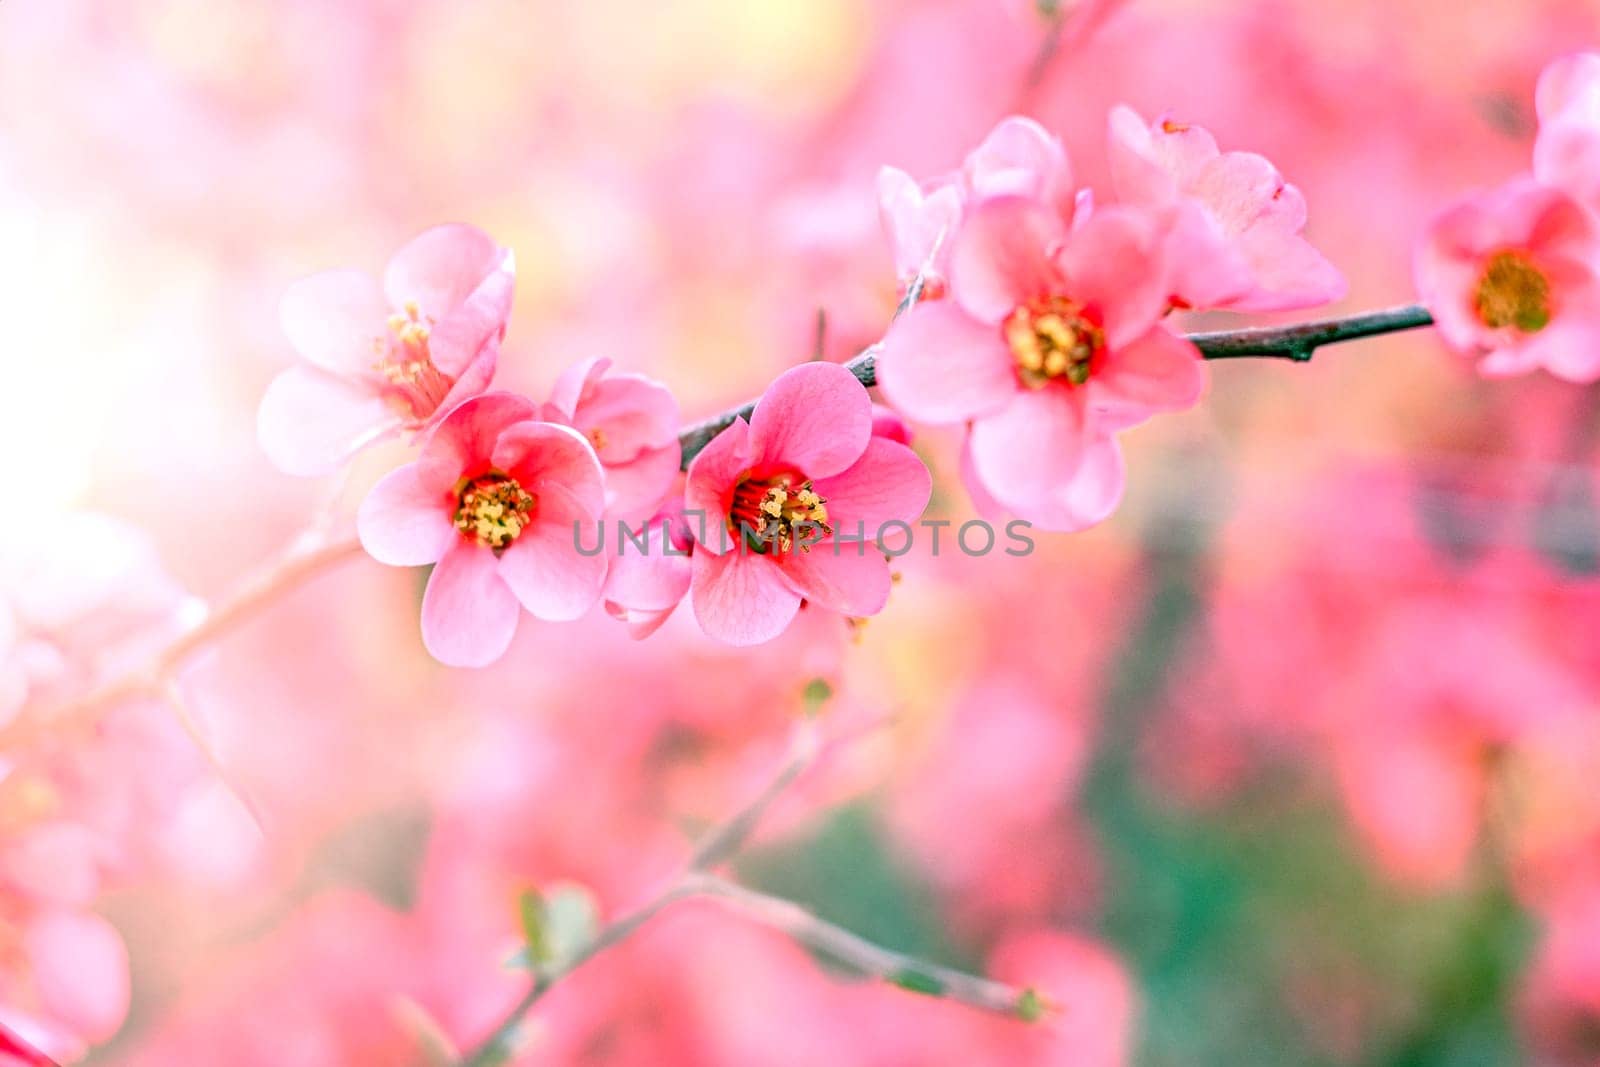 Gently pink flowers of outdoors in summer spring close-up on soft background. Delicate dreamy image of beauty of nature.